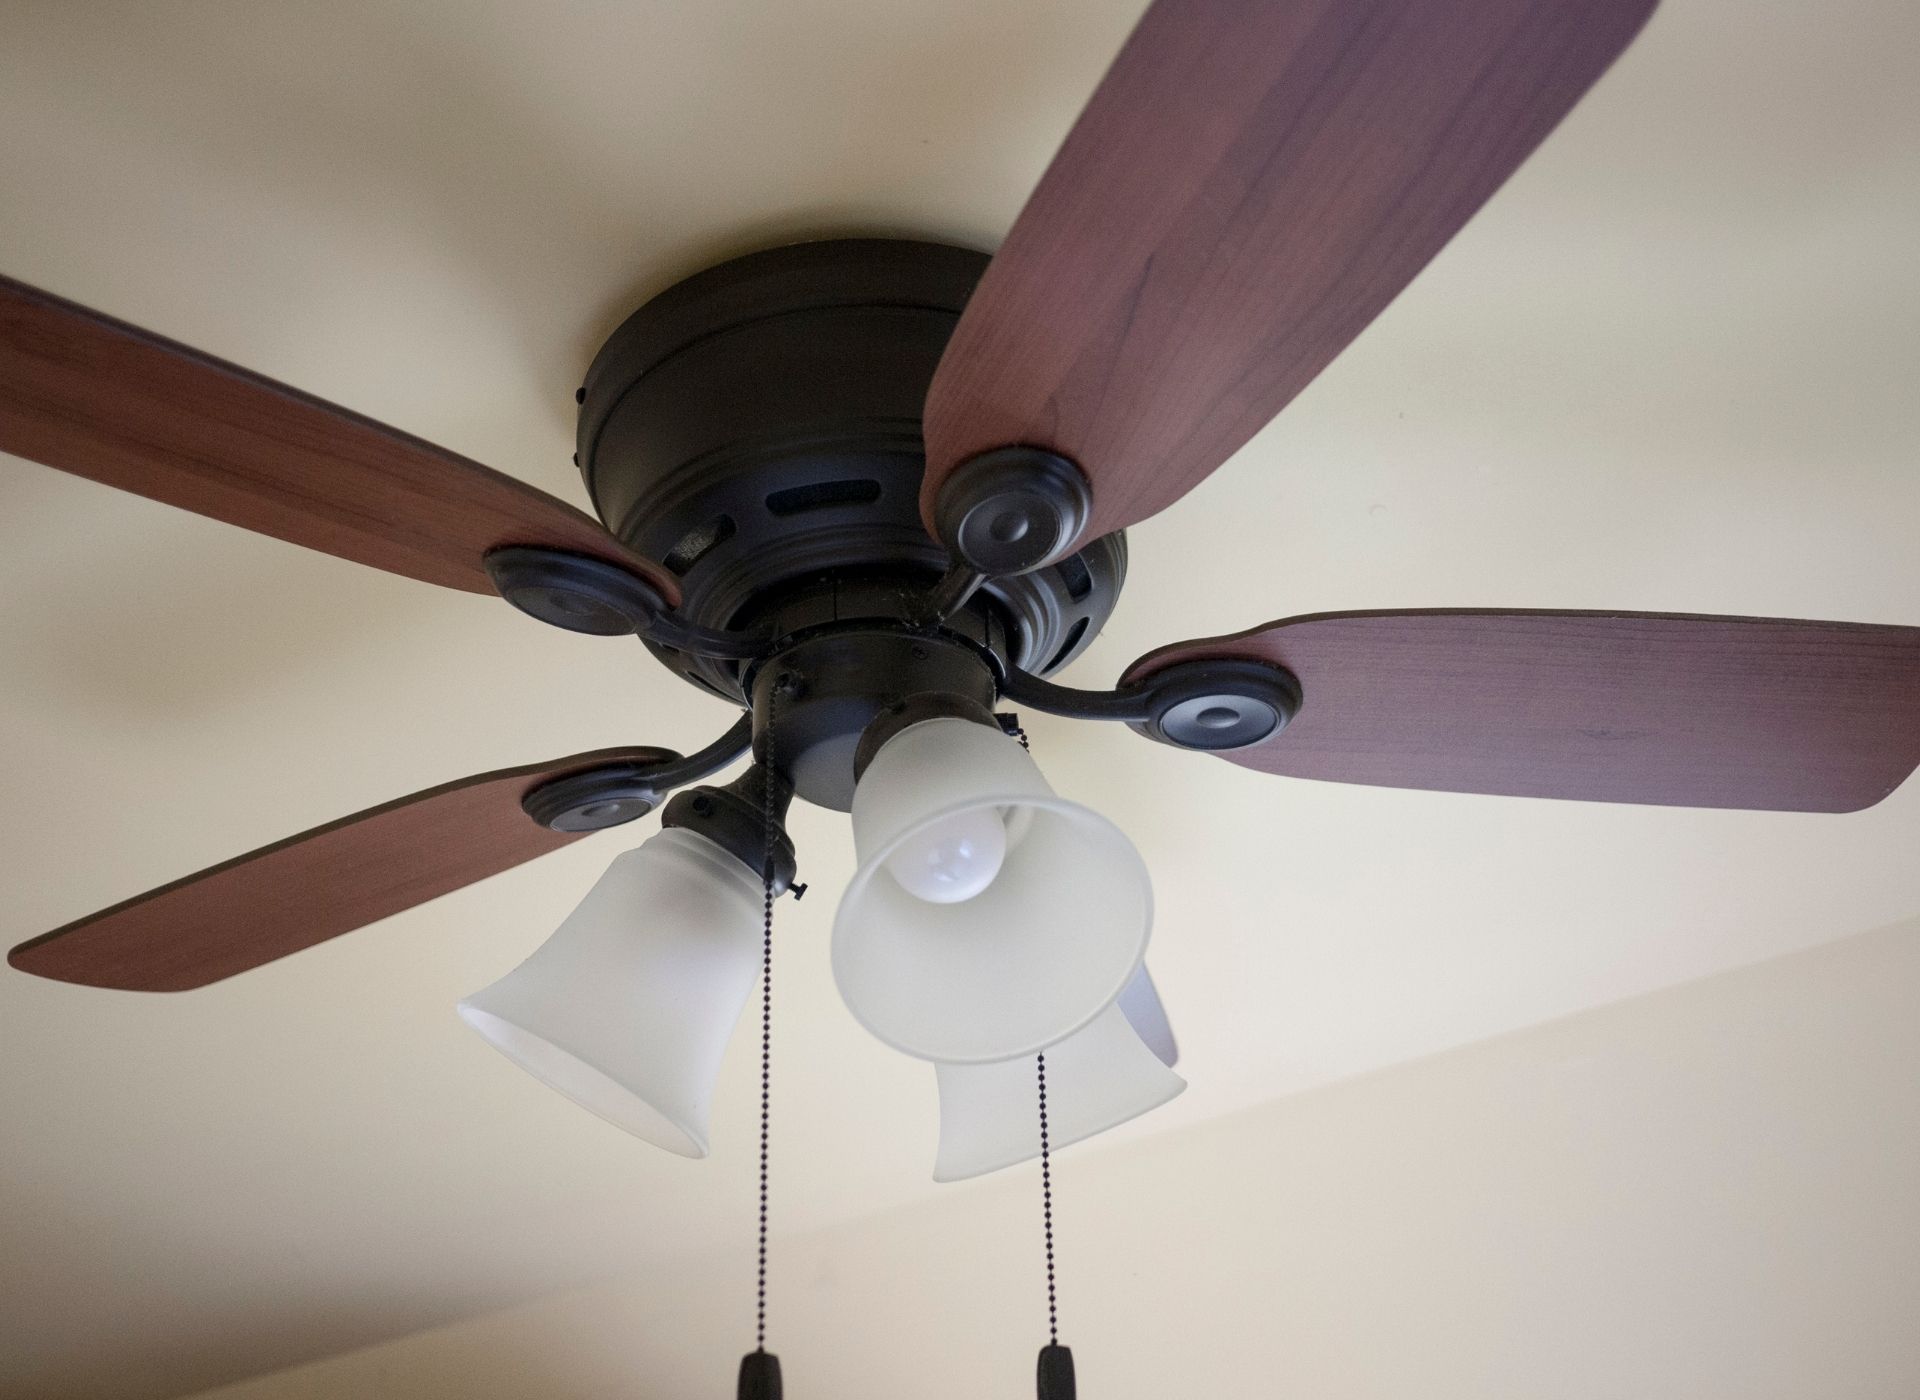 Do Ceiling Fans Help Cool Your Home?